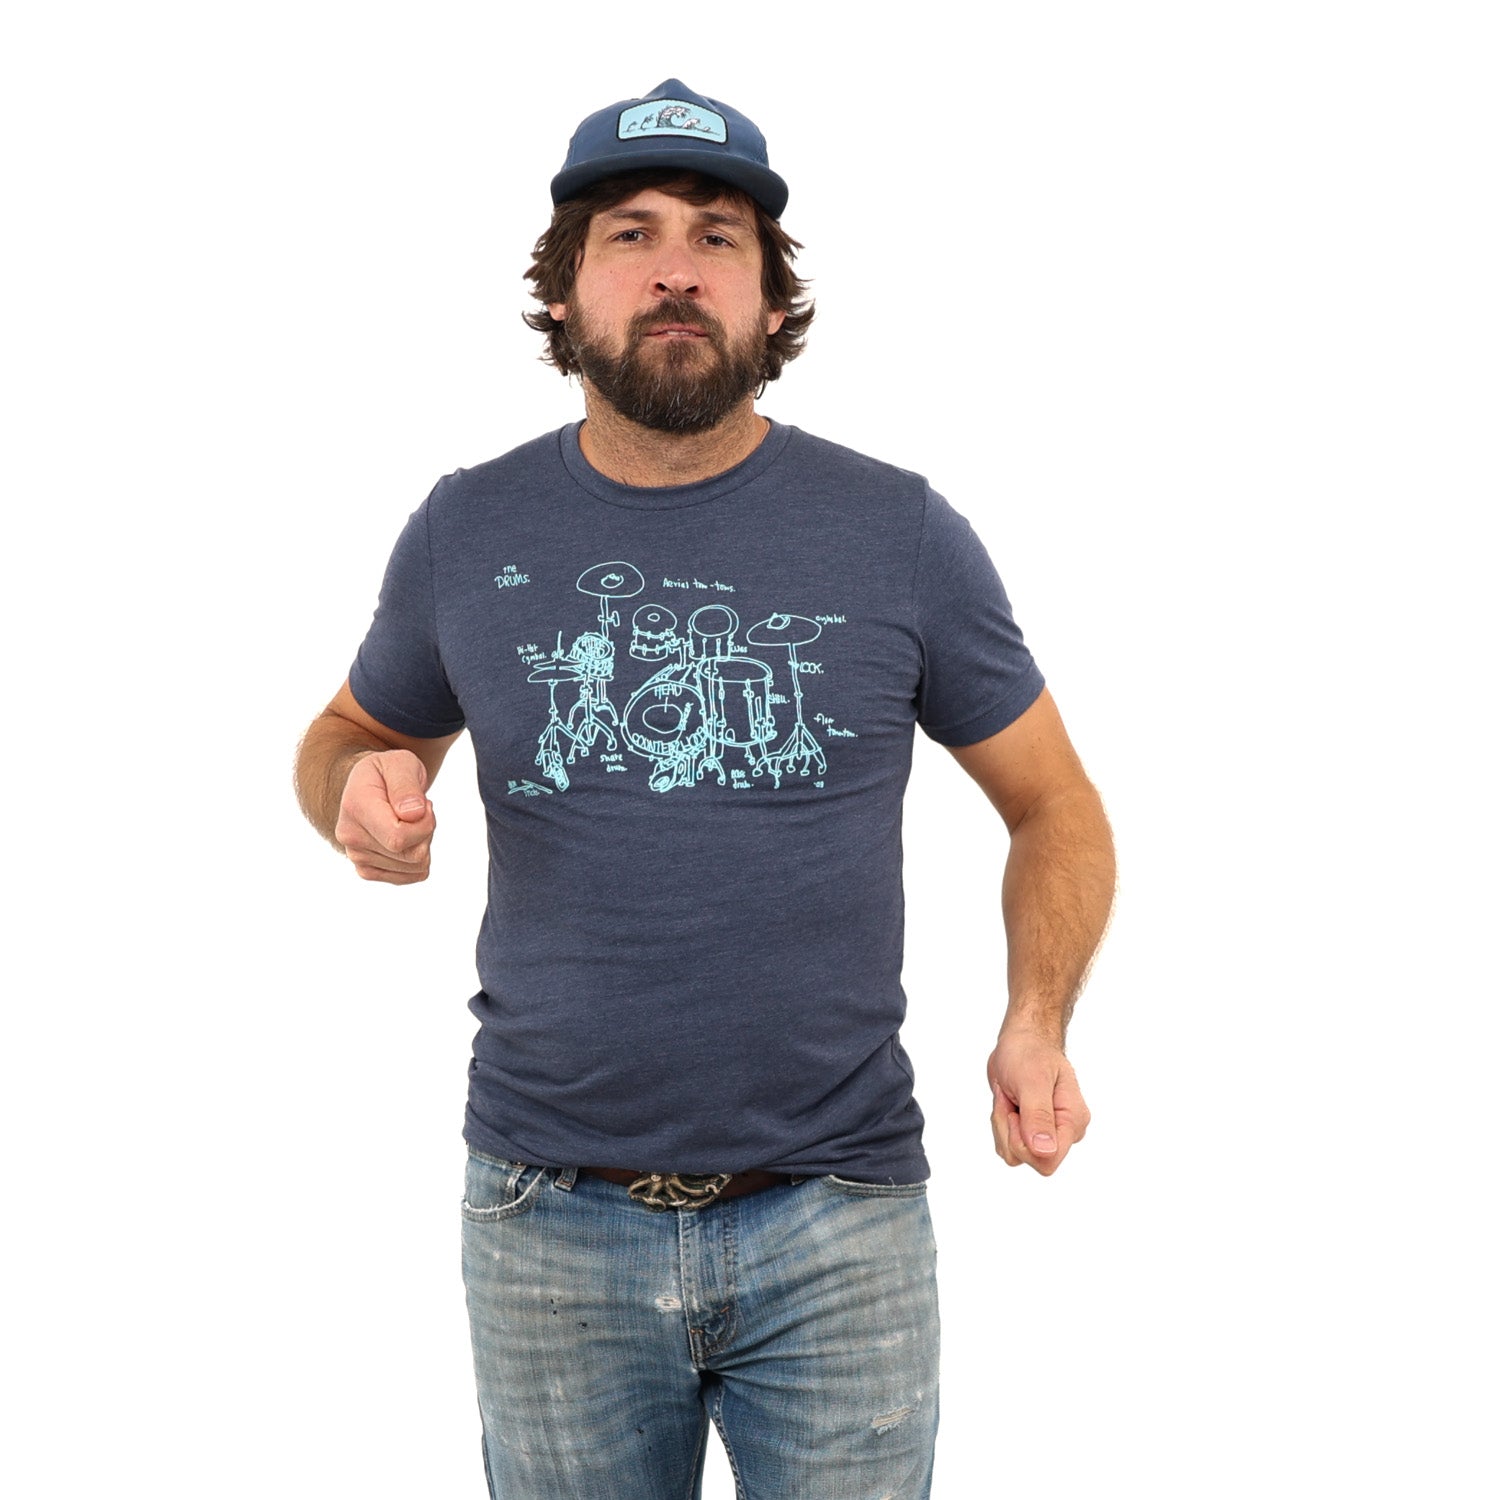 Man pretending to play drums while wearing a ball cap and a blue shirt with a drum set screen printed on it. White background. 